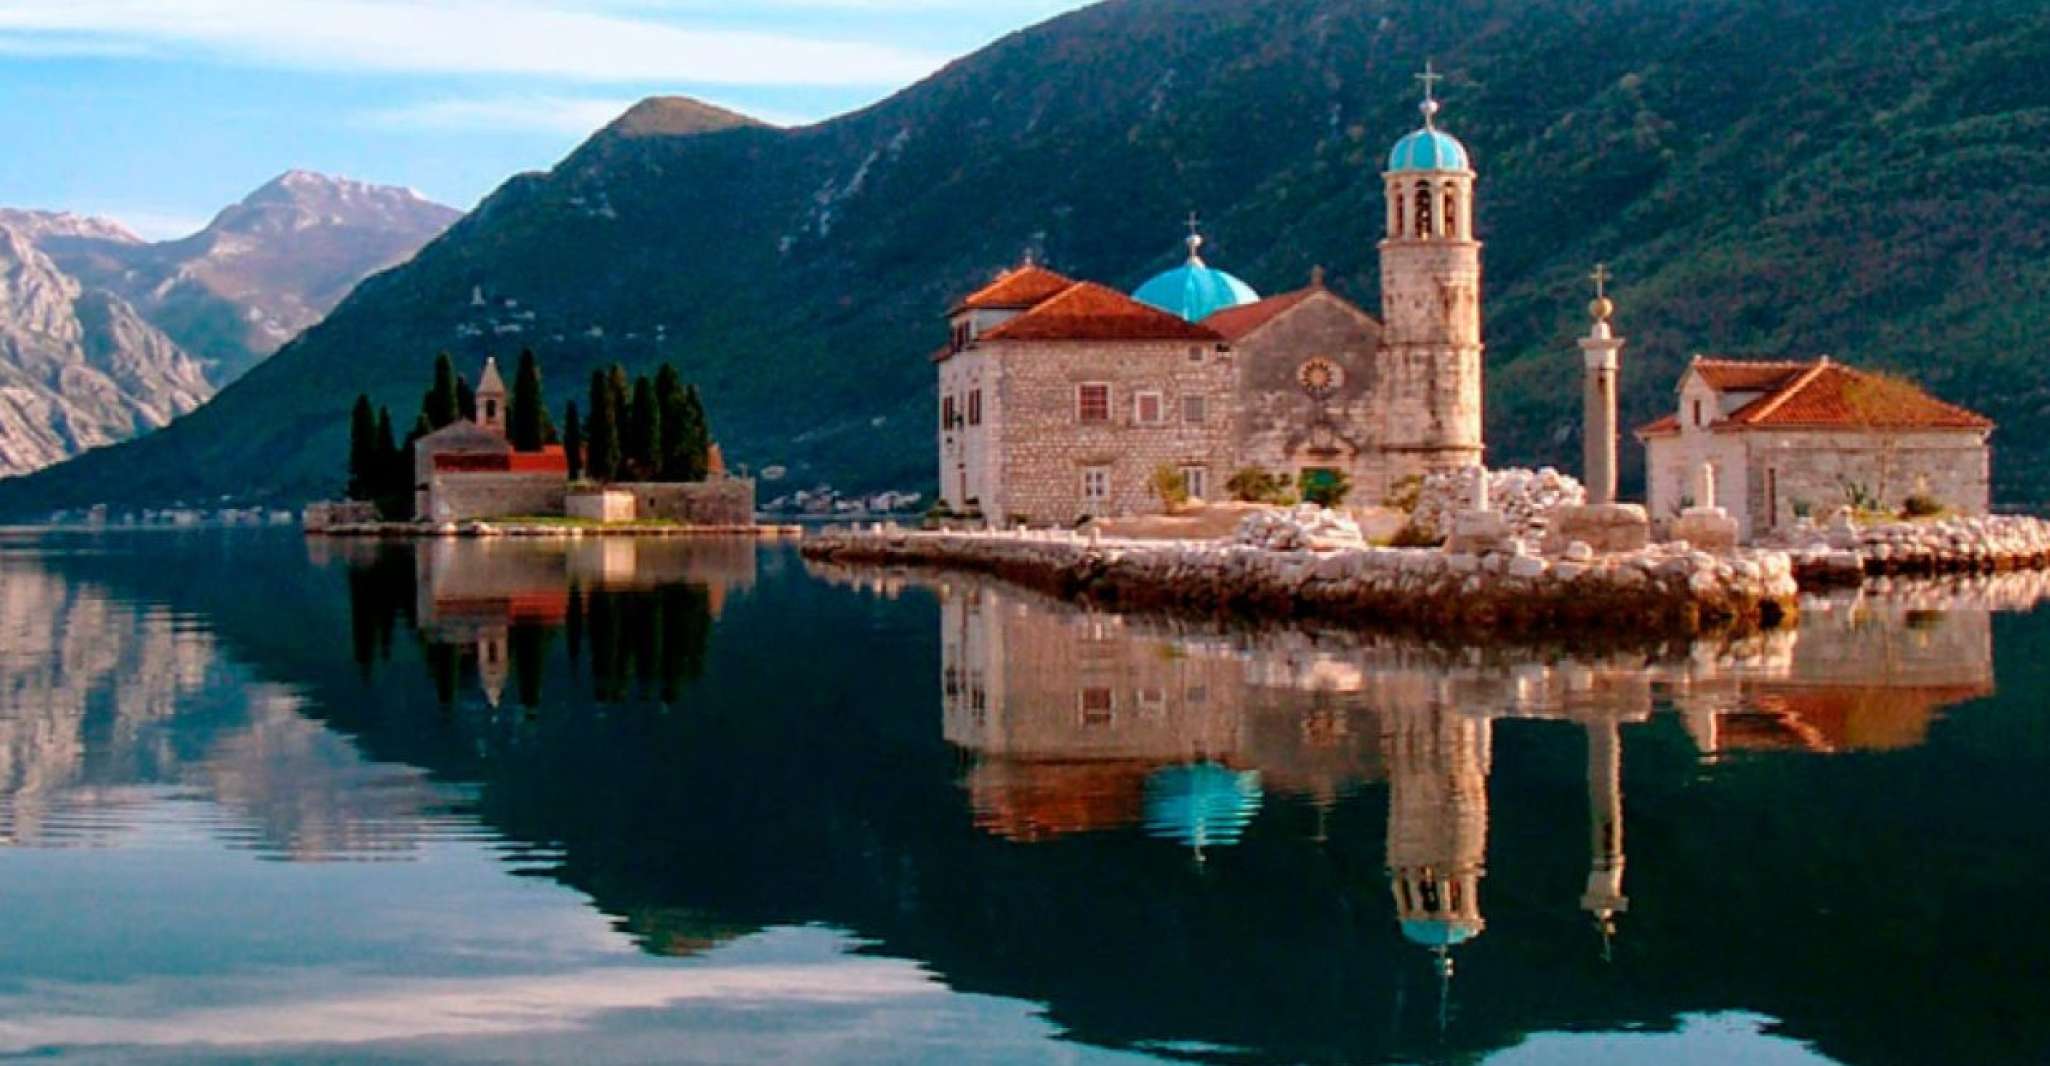 From Cavtat, Montenegro Day Tour - Housity